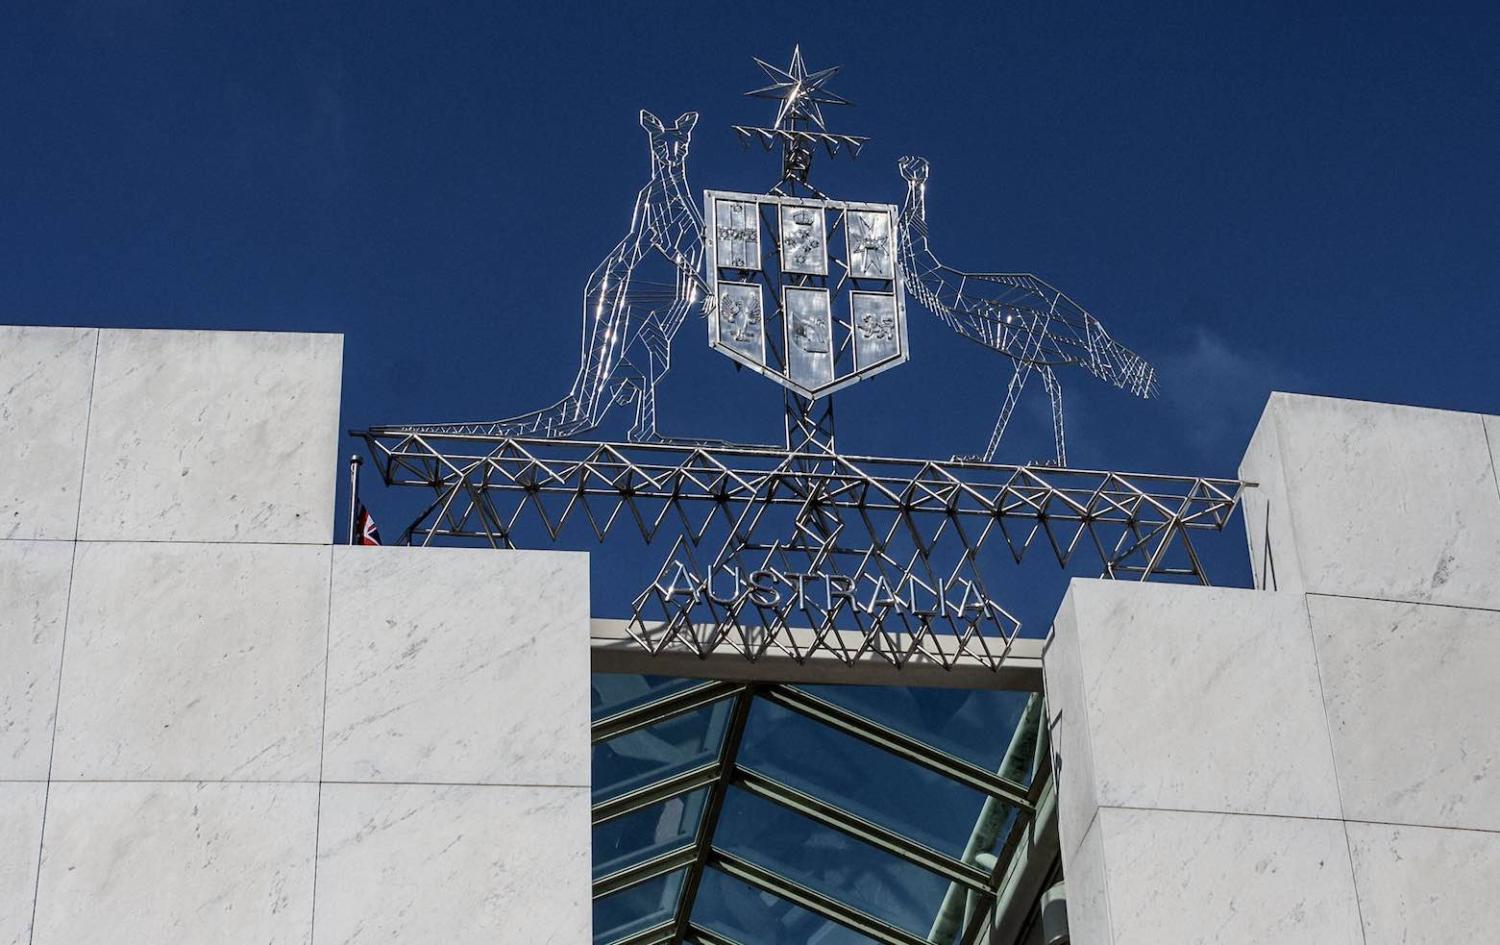 The Australian coat of arms over parliament house, Canberra (John/Flickr)